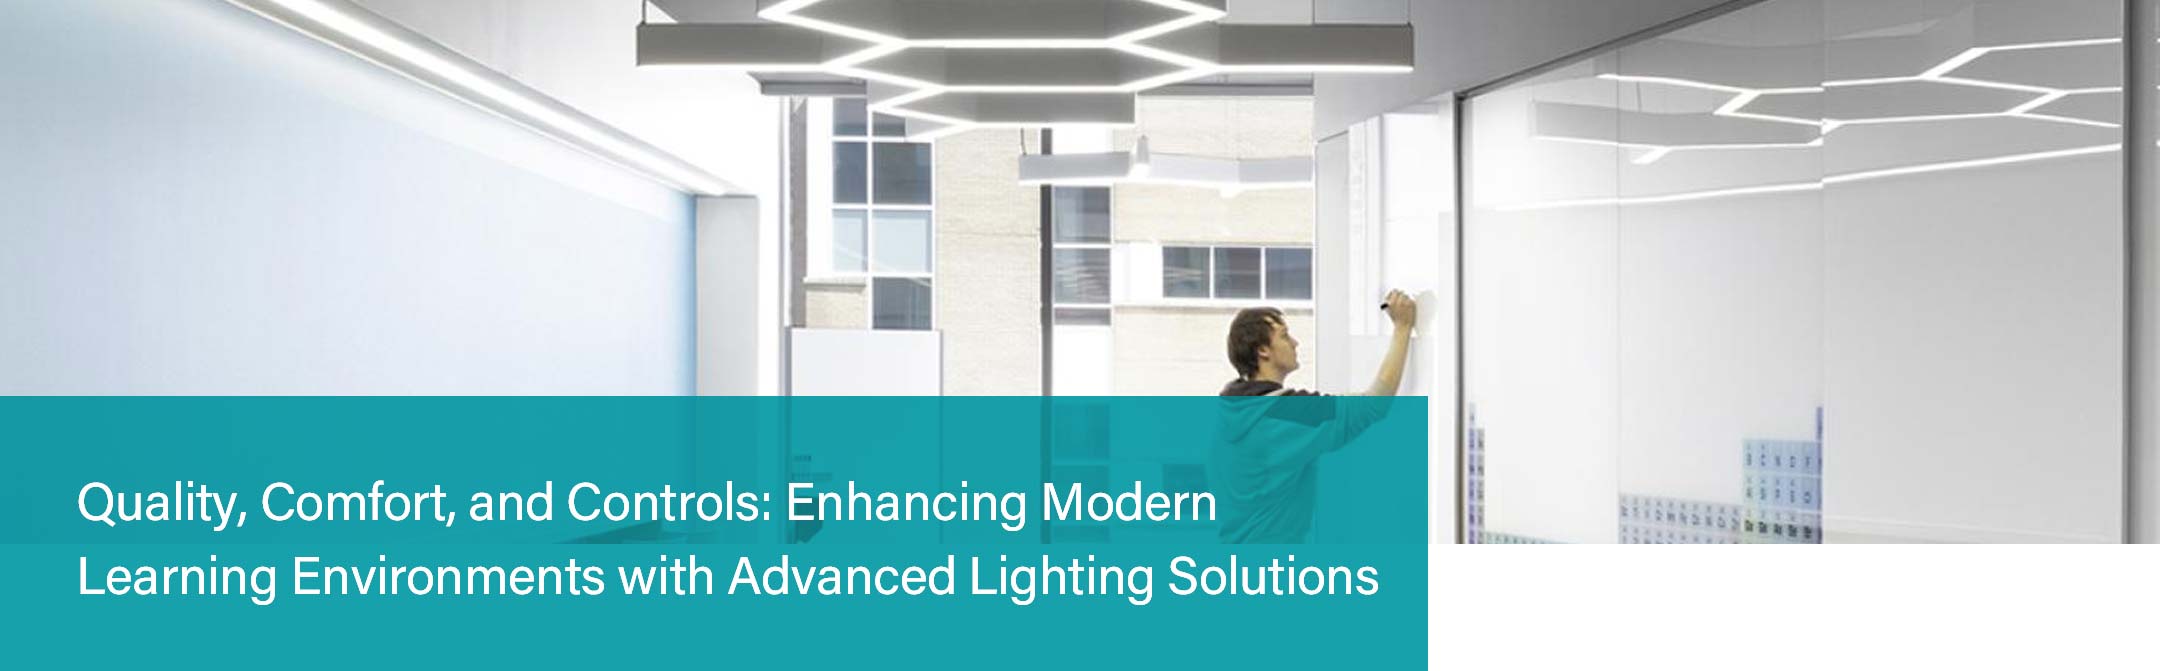 Quality, Comfort and Controls: Enhancing Modern Learning Environments with Advanced Lighting Solutions